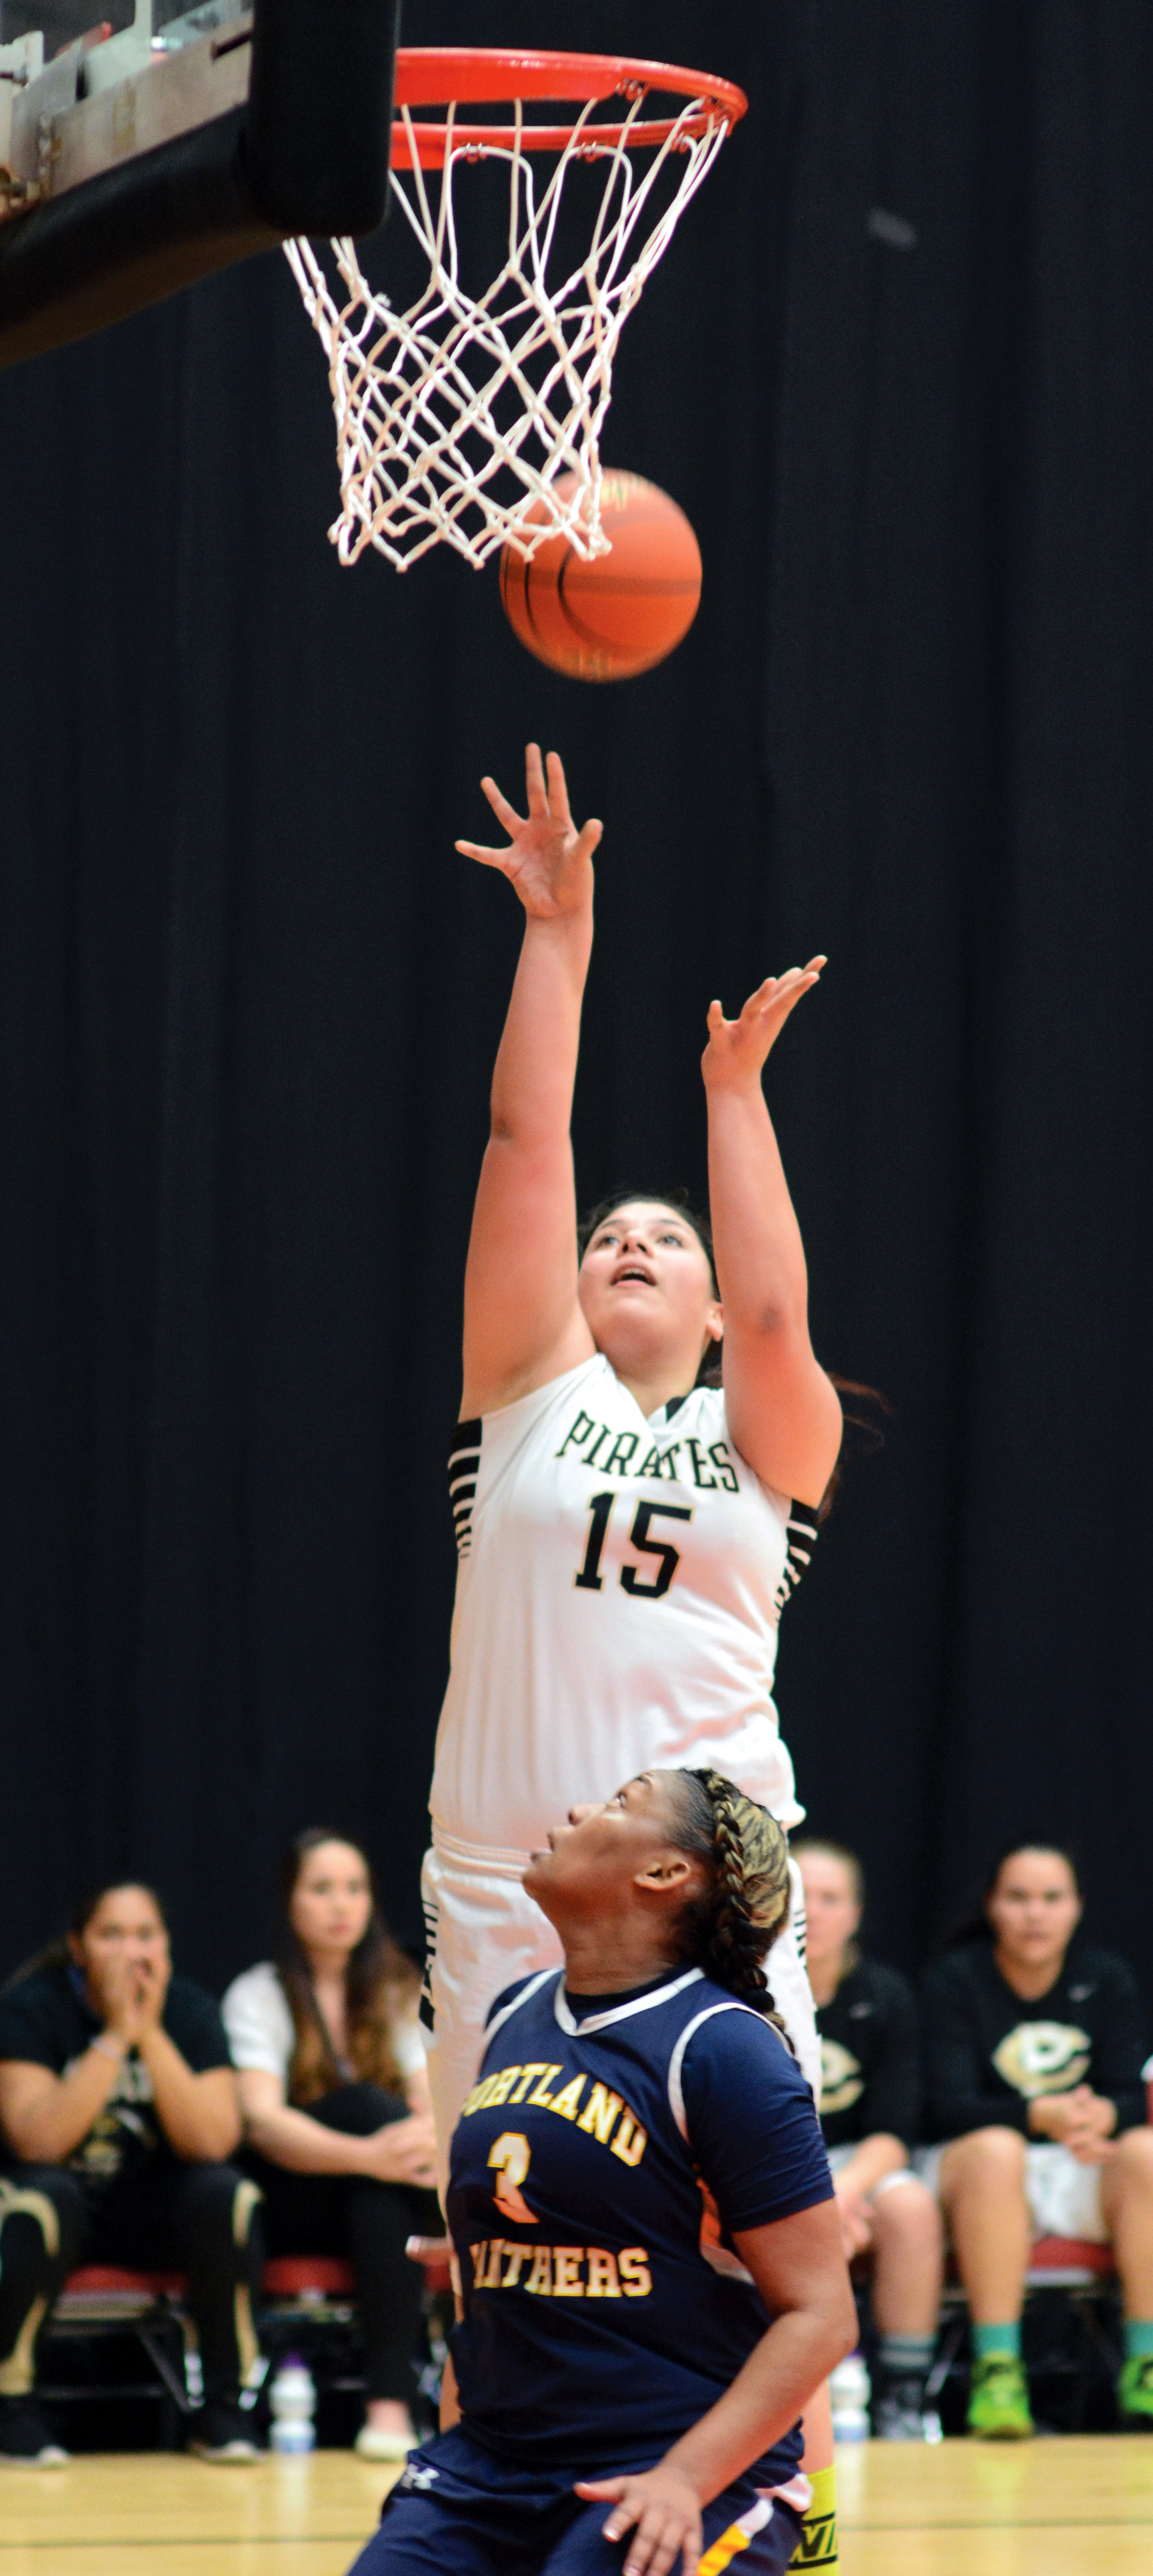 Peninsula's Gabi Fenumiai (15)goes for a layup against Portland's Shyanne Akles during the Pirates' 81-60 win to open the NWAC tournament. (Rick Ross)